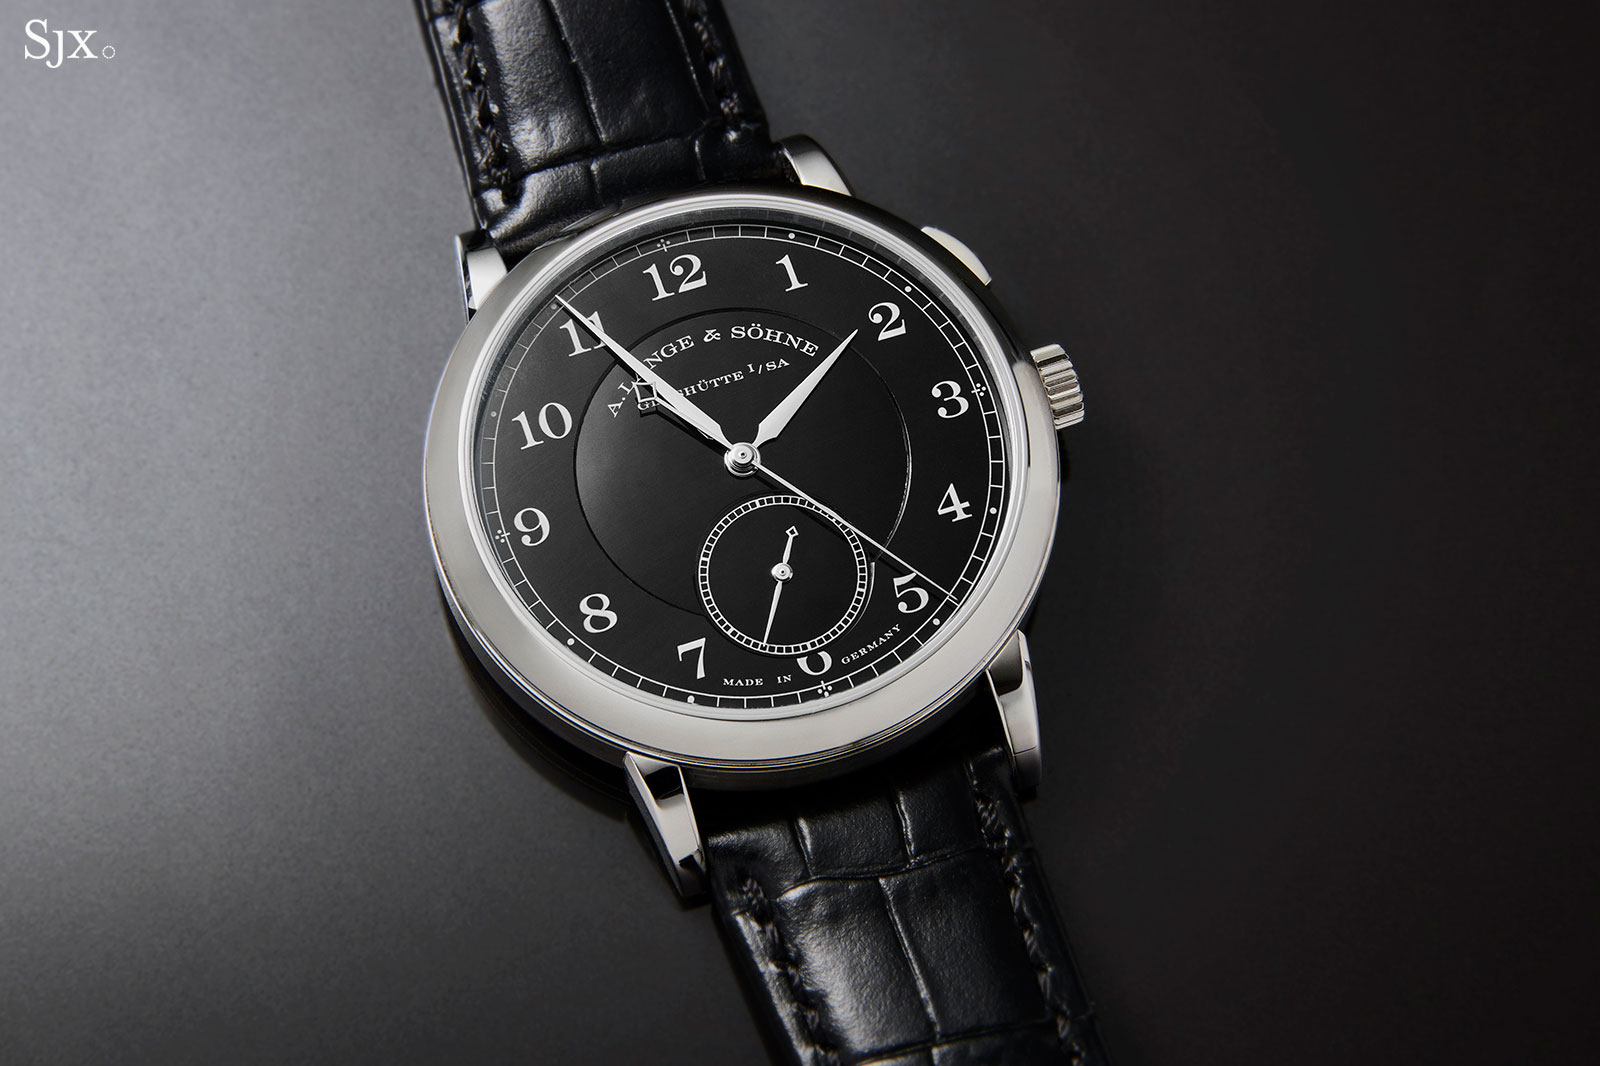 A Detailed Look At The A Lange Sohne 1815 Homage To Walter Lange In Steel Sjx Watches